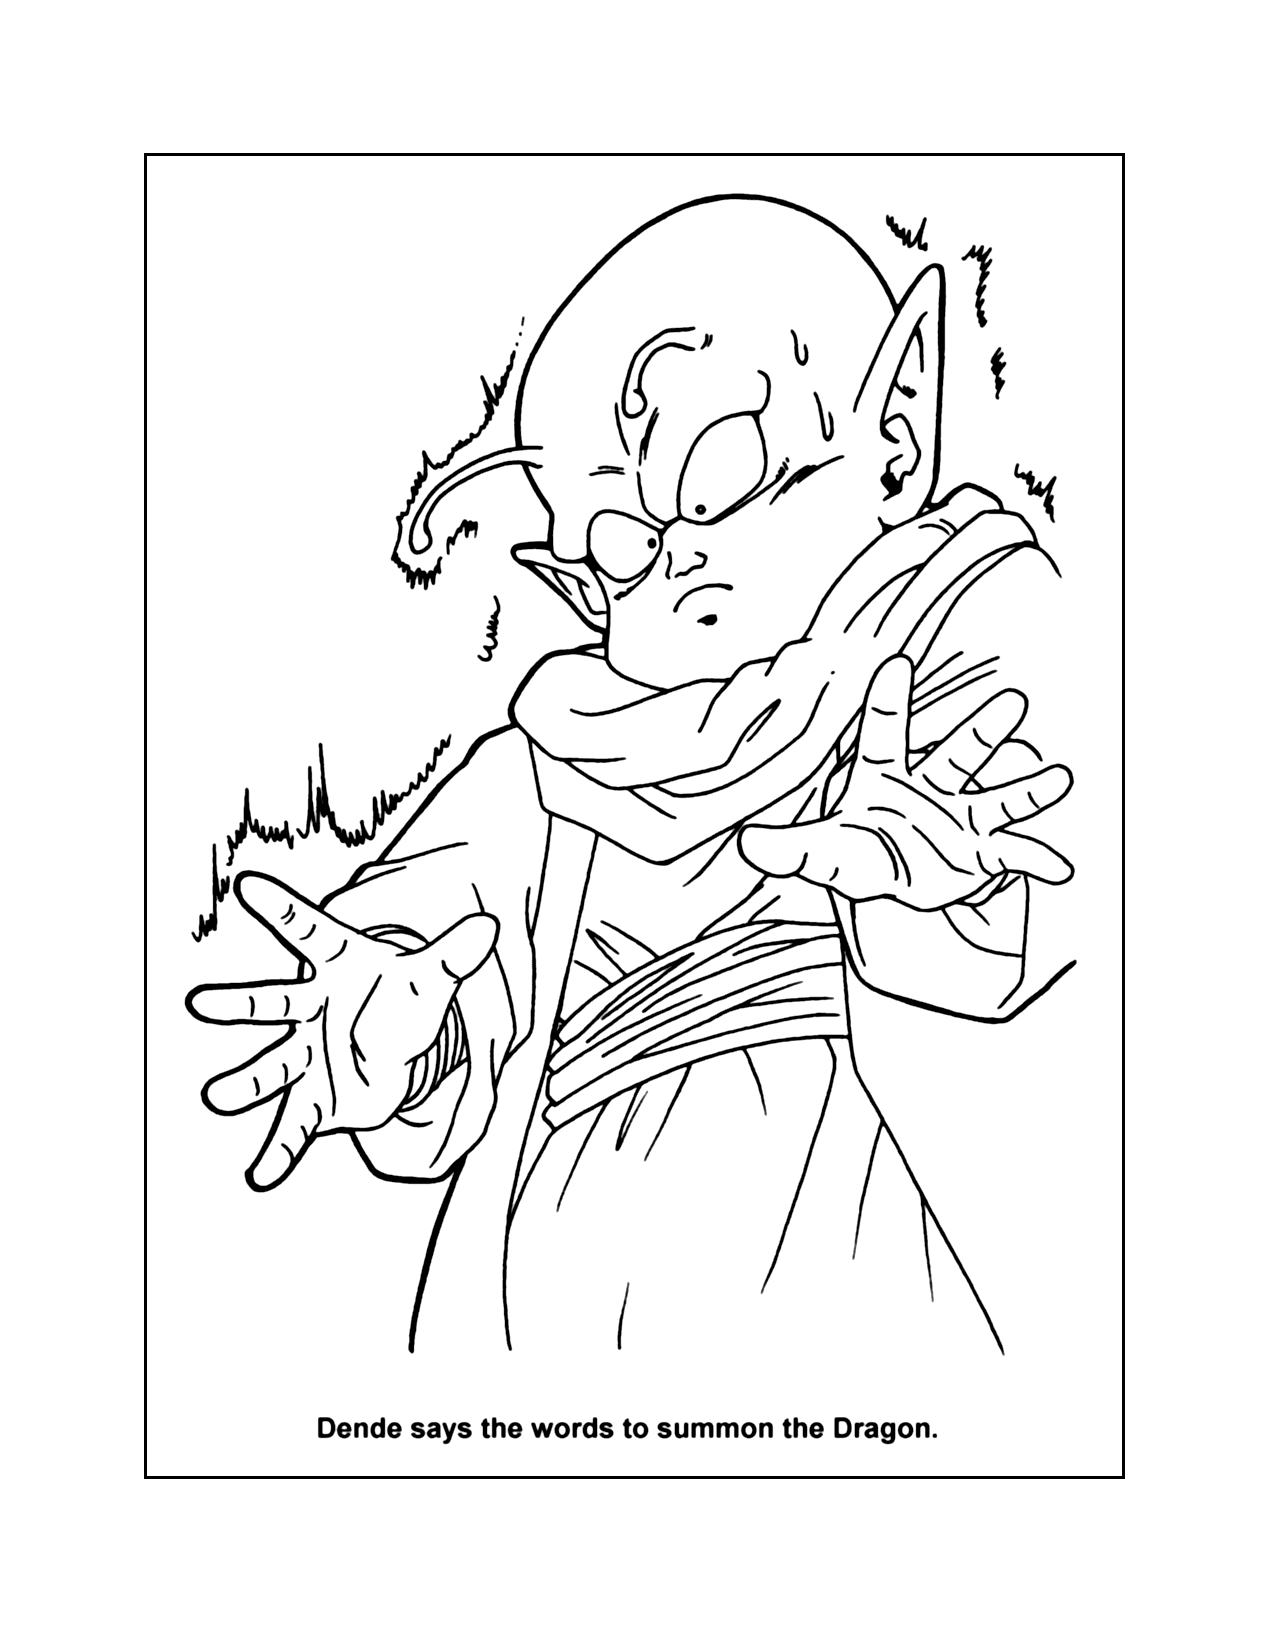 Dende Summons The Dragon Coloring Page